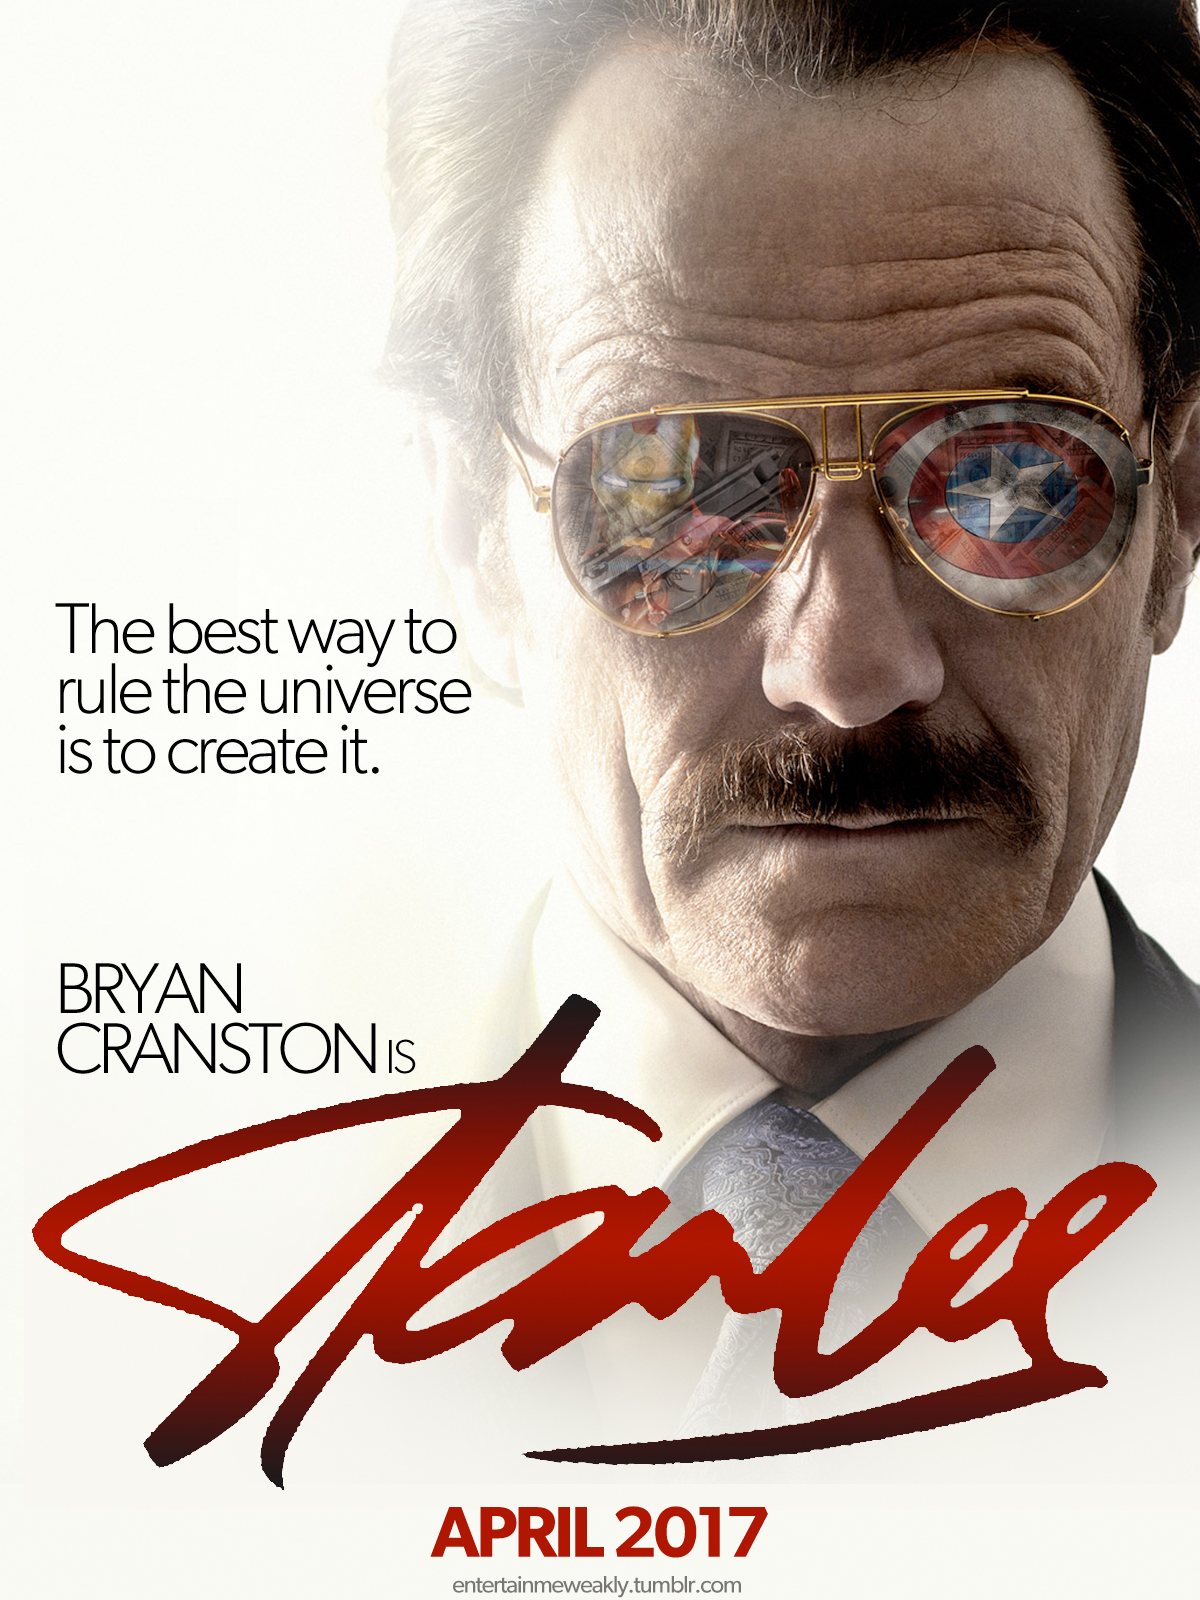 Stan Lee Movie Planned As A Fantastical Action-Adventure